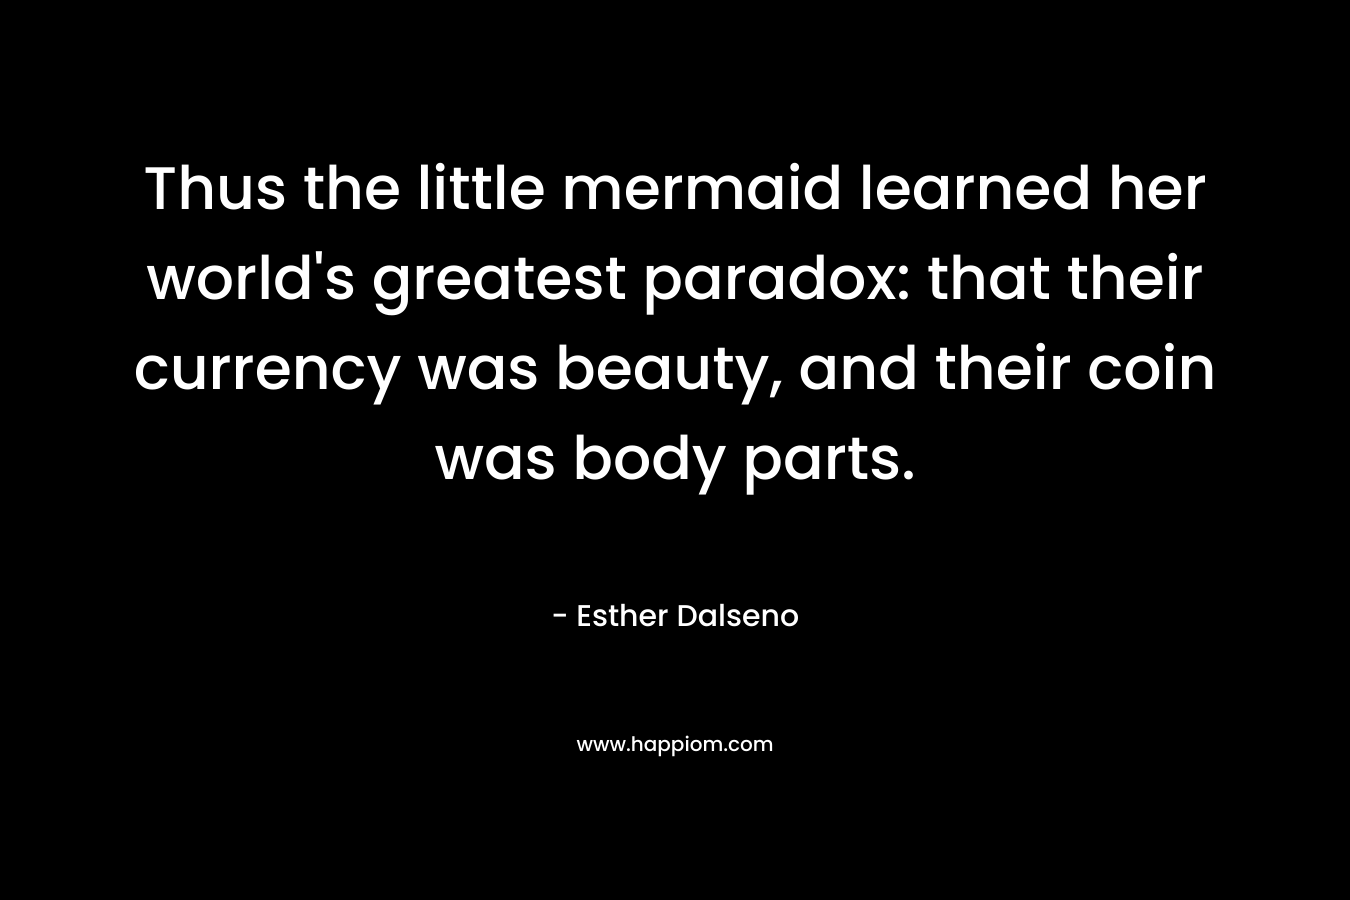 Thus the little mermaid learned her world’s greatest paradox: that their currency was beauty, and their coin was body parts. – Esther Dalseno